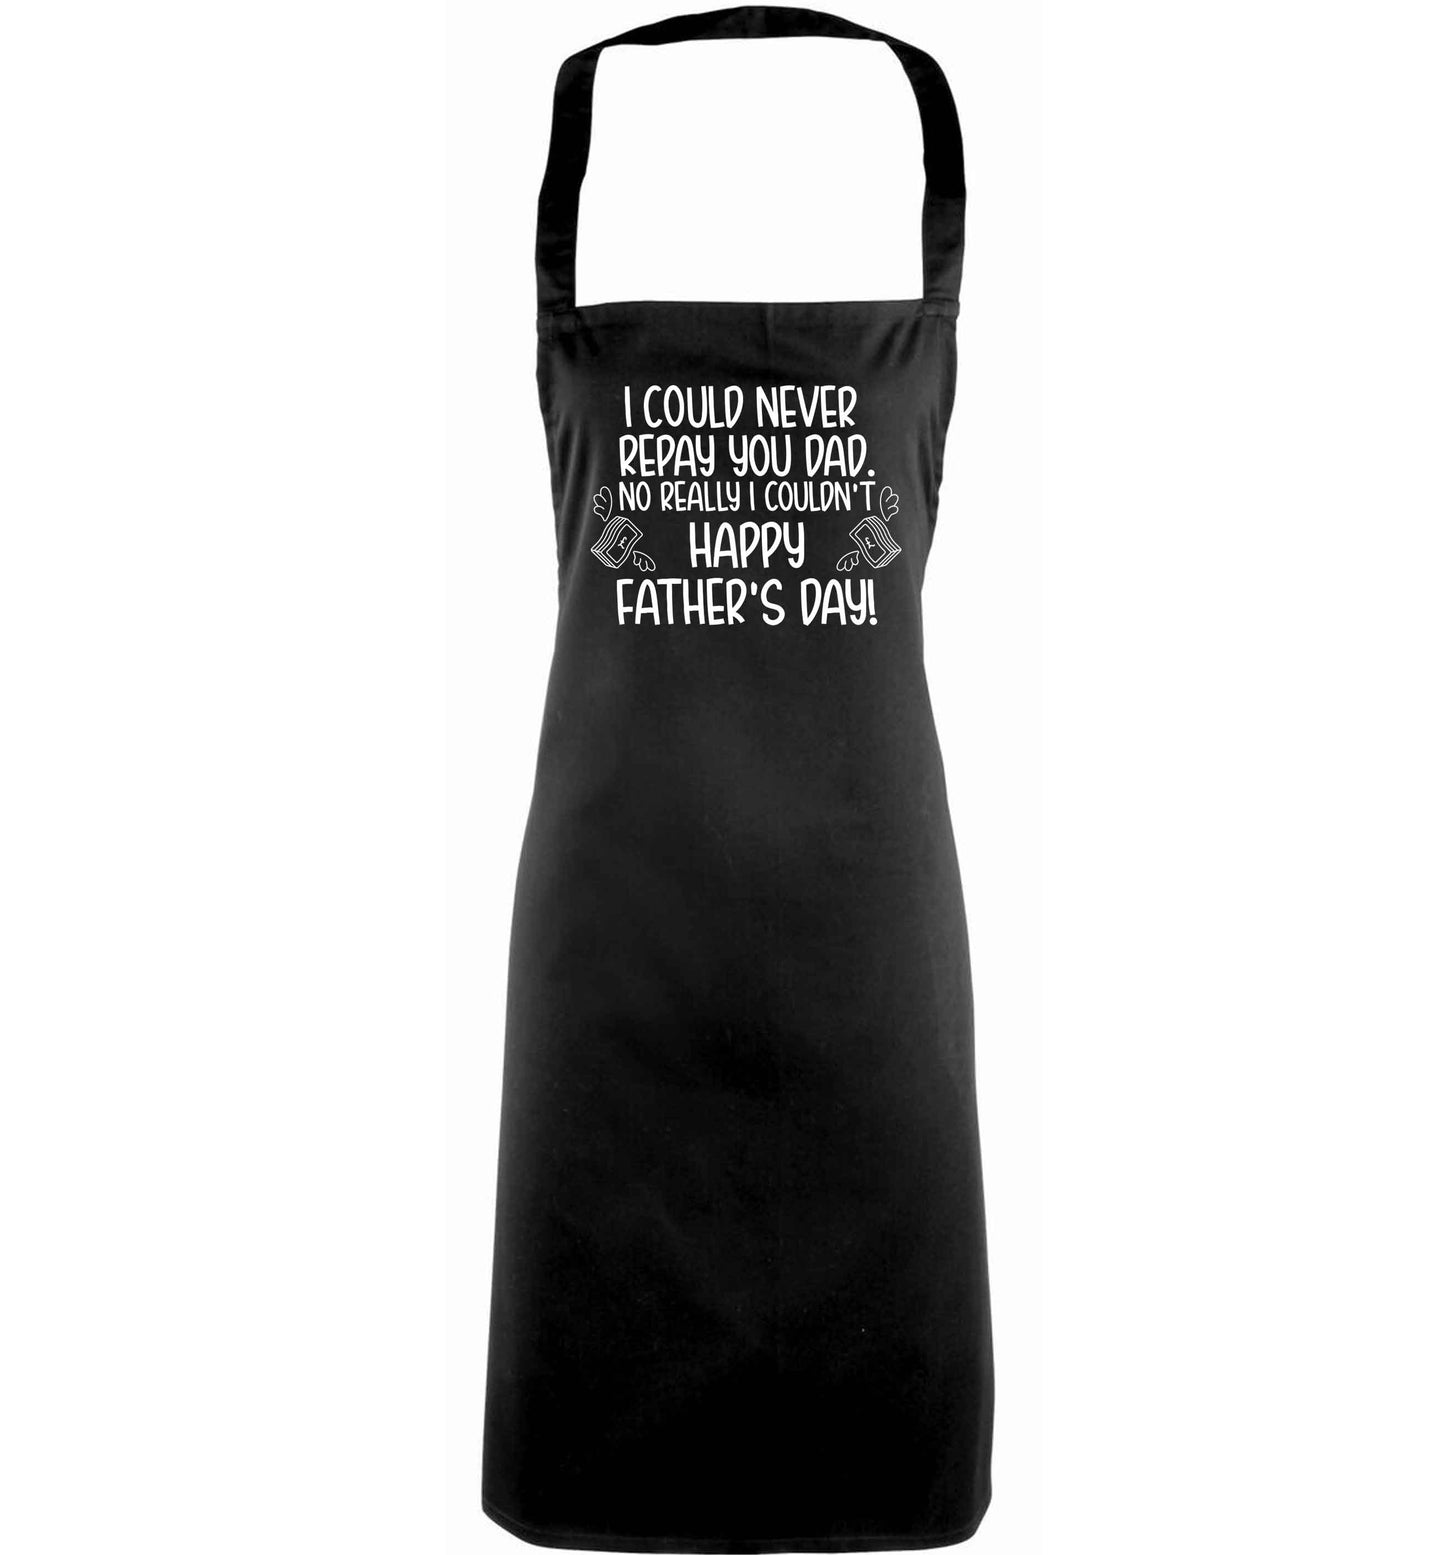 I could never repay you dad. No I really couldn't happy Father's day! adults black apron